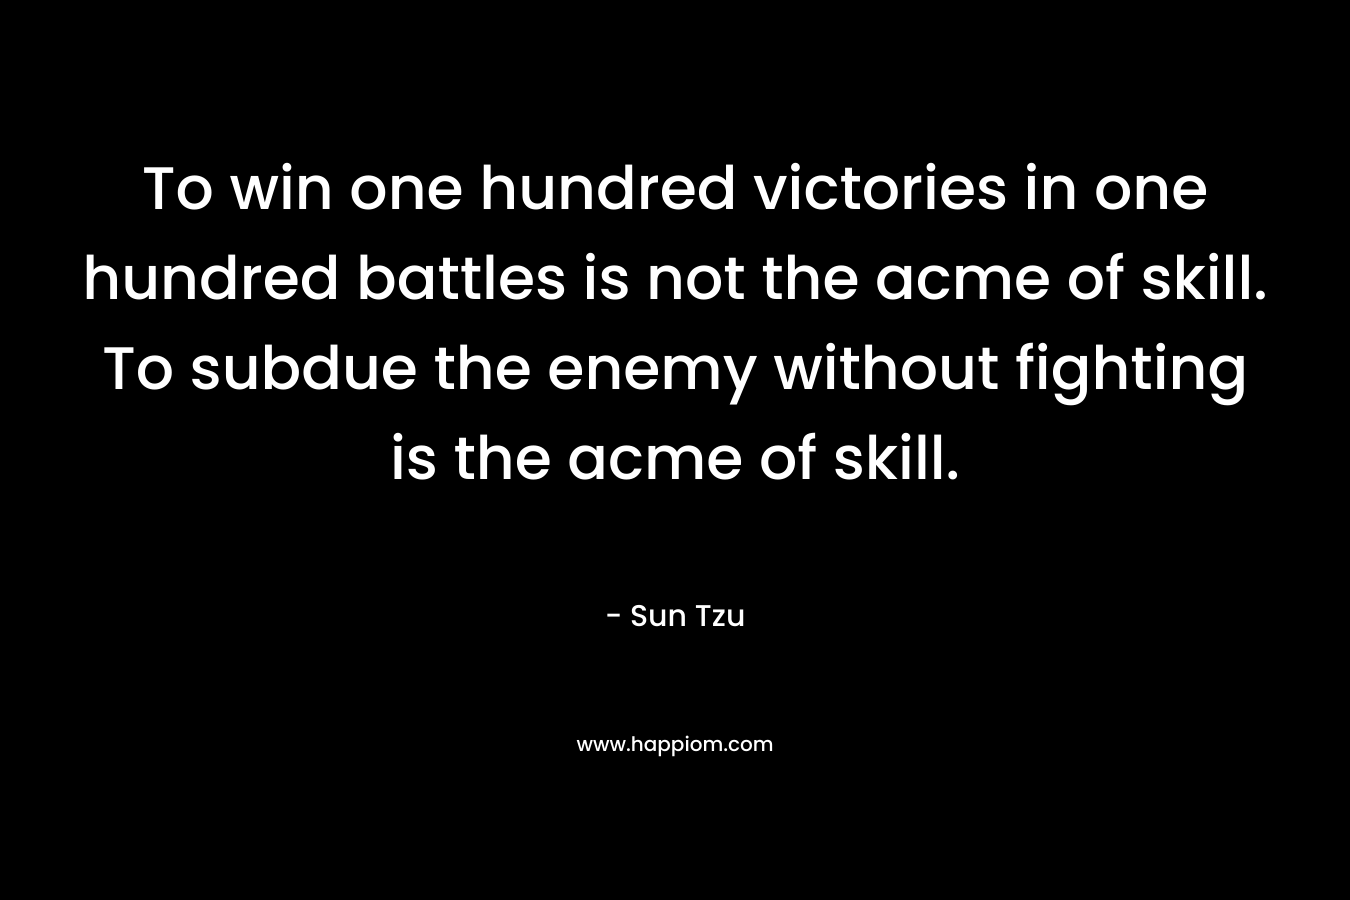 To win one hundred victories in one hundred battles is not the acme of skill. To subdue the enemy without fighting is the acme of skill.